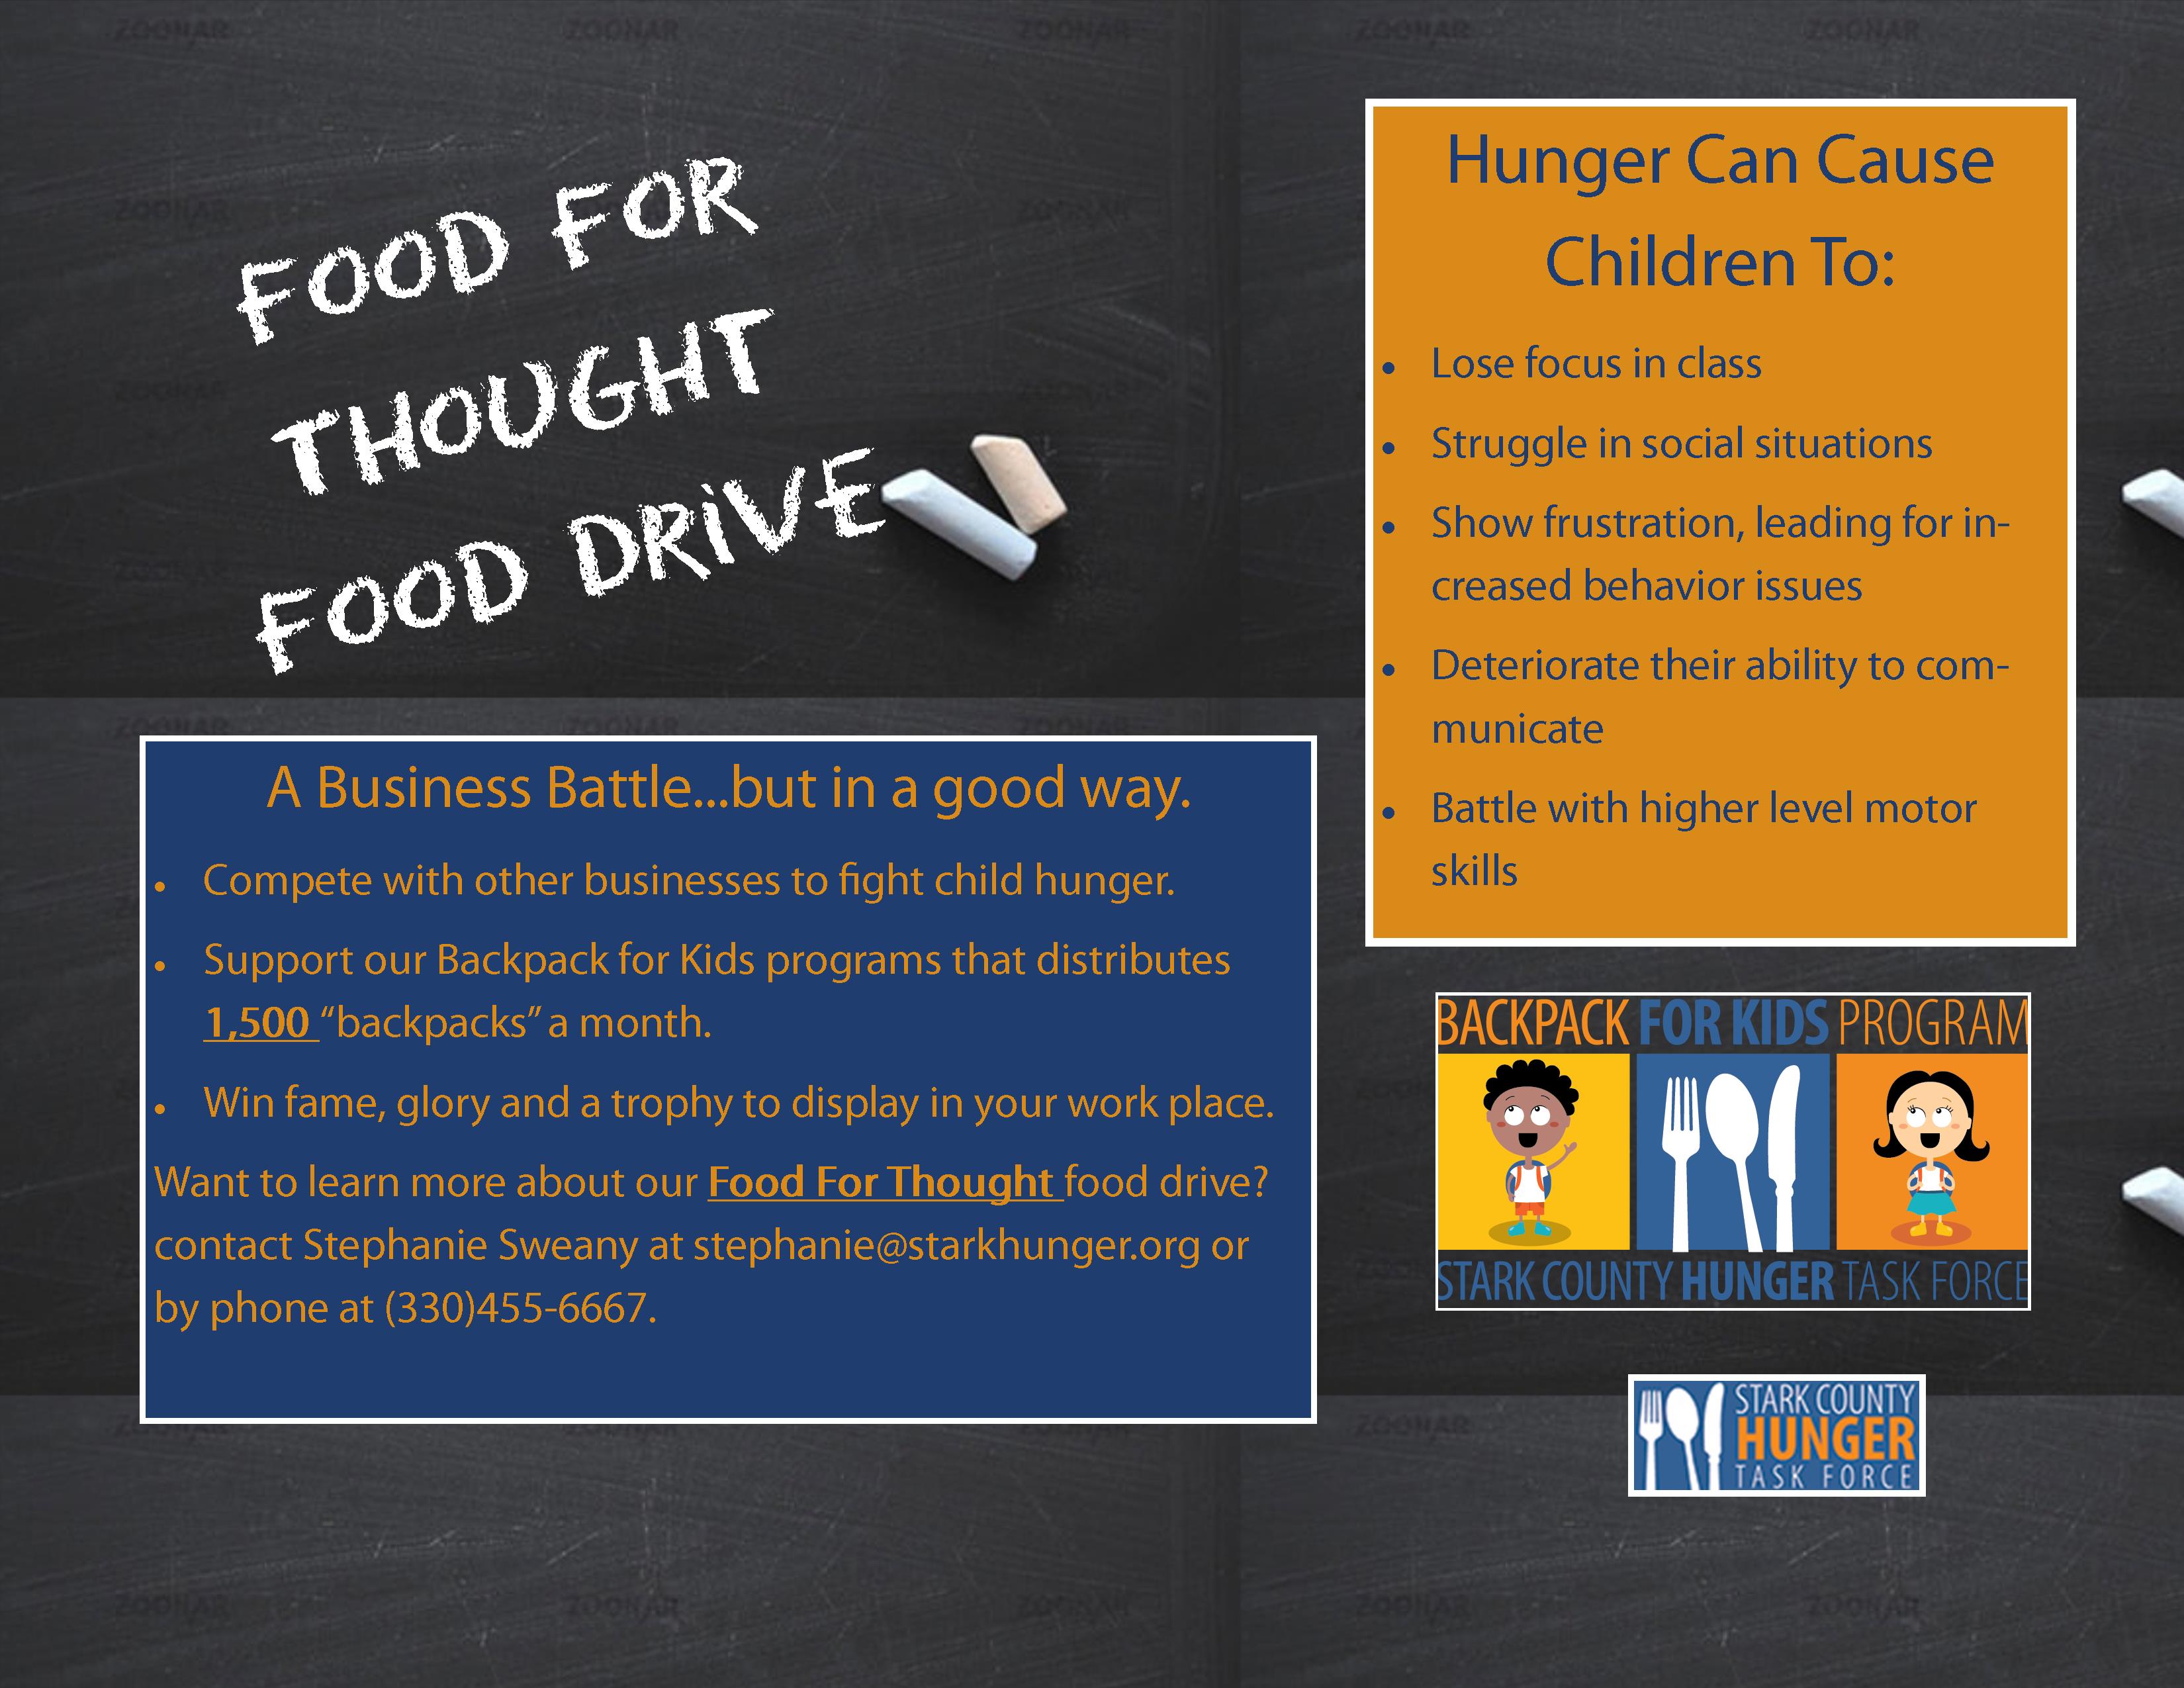 Food For Thought Food Drive: Business Battle!